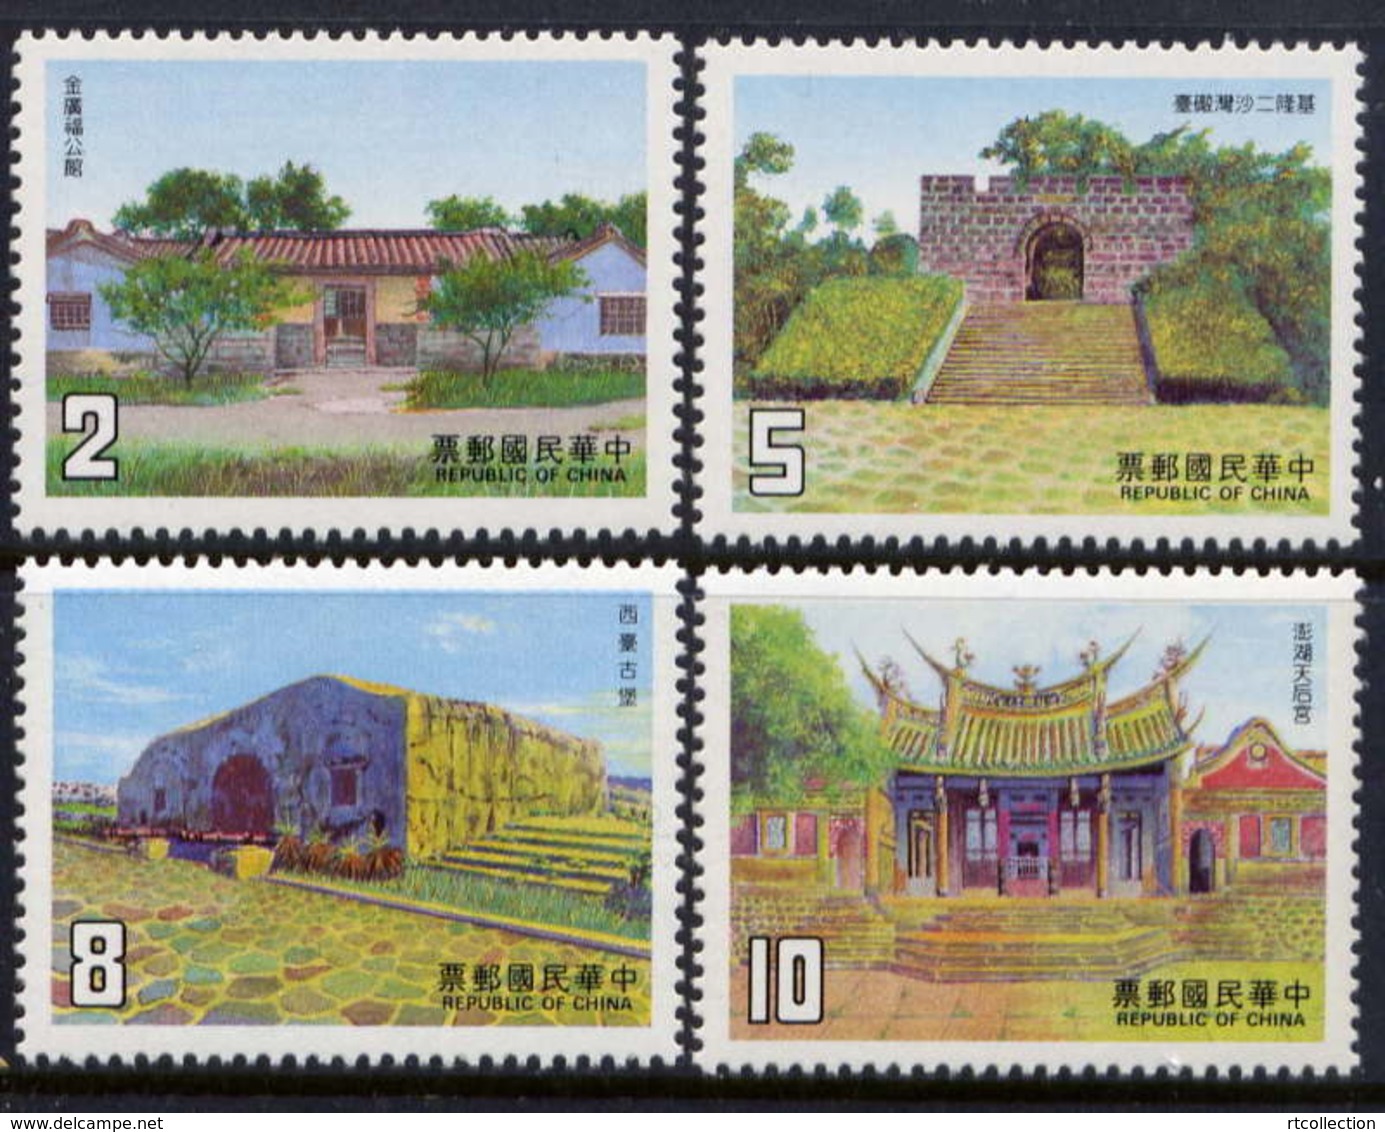 Taiwan 1986 Historic Buildings Relic Architecture Geography Places Landscape Scenery View Temple Stamps MNH Sc#2561-64 - Monuments